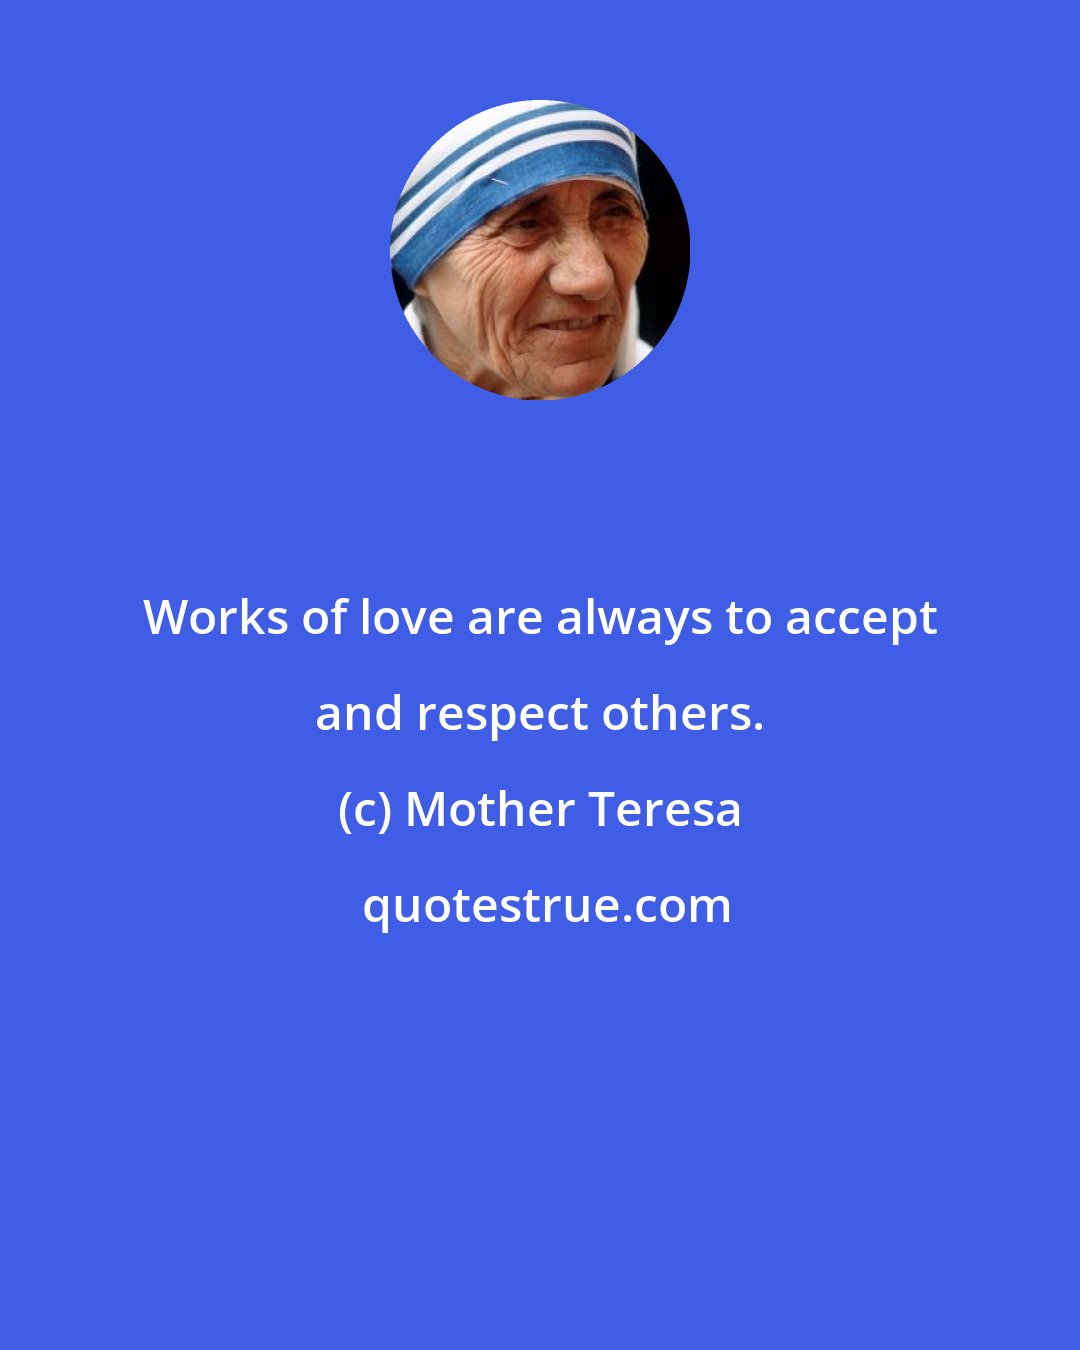 Mother Teresa: Works of love are always to accept and respect others.